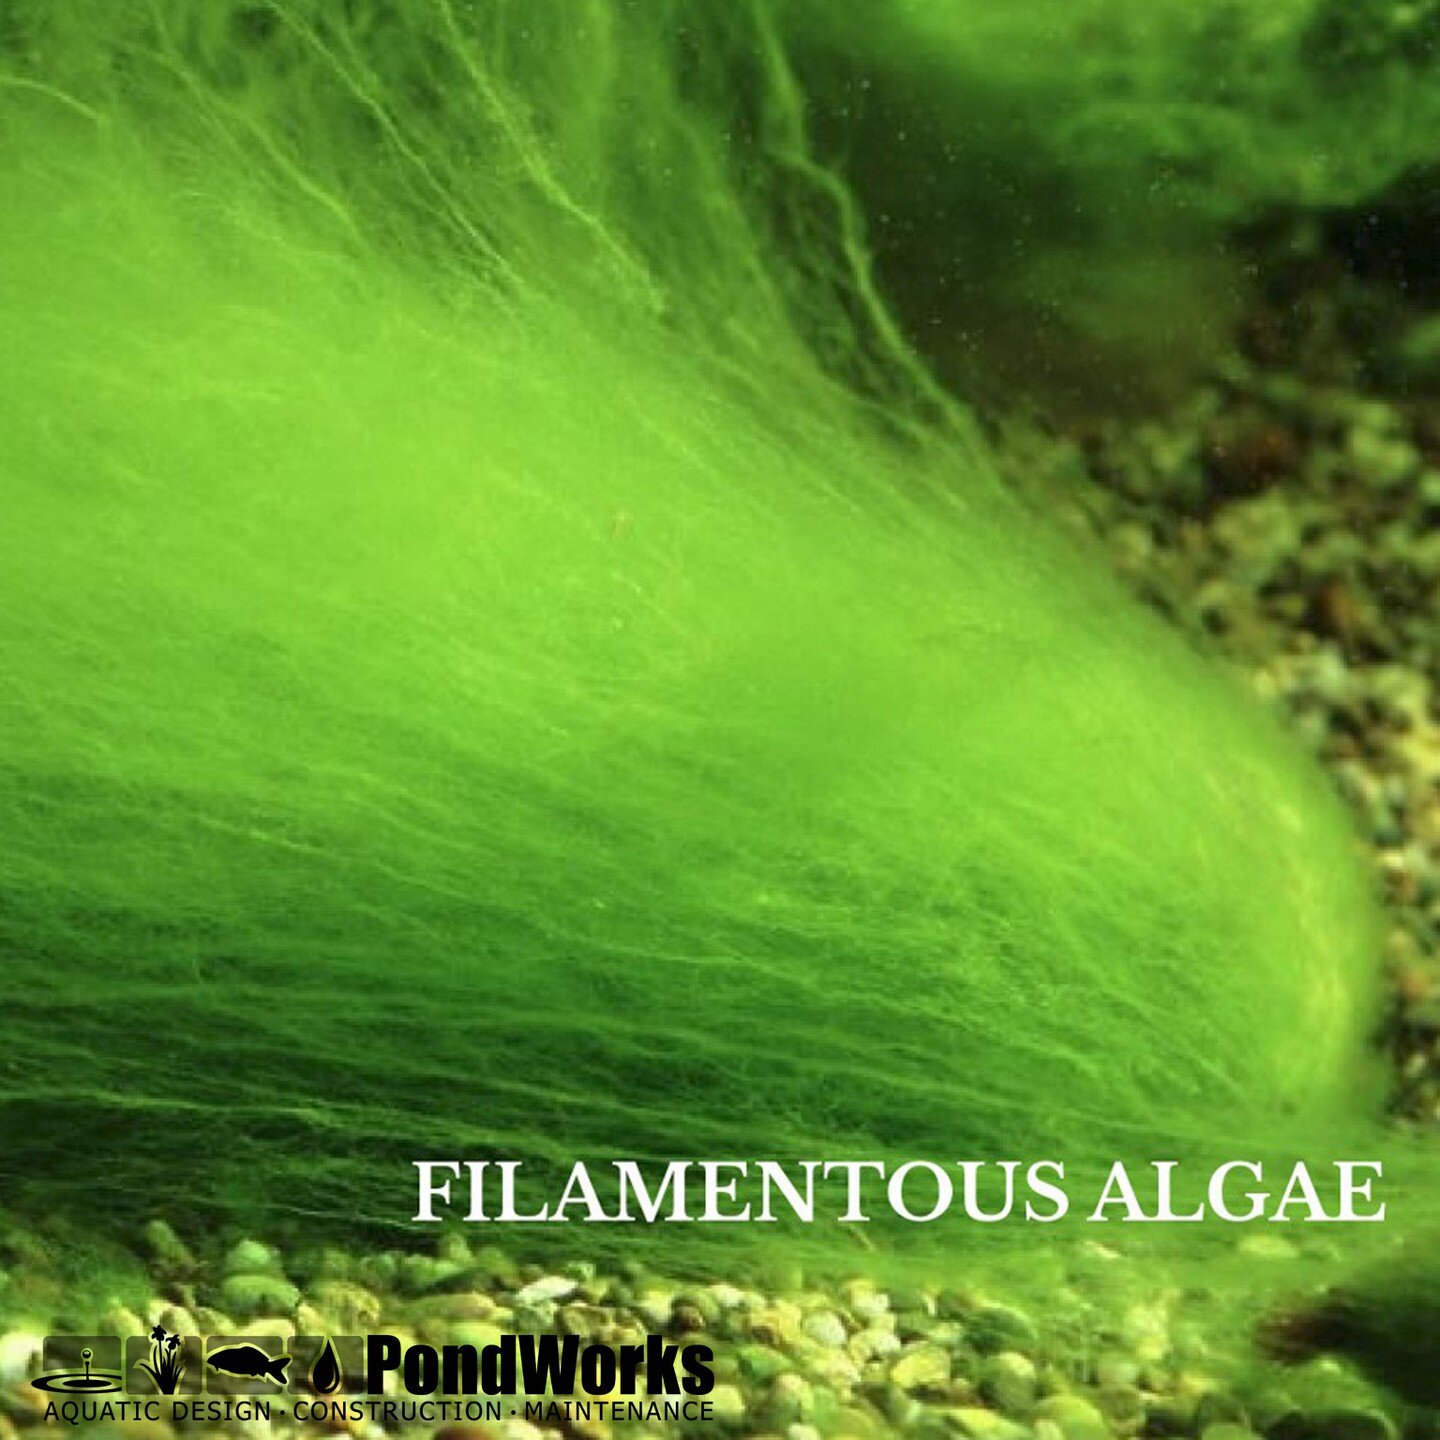 Algae exists in most water bodies and survives, and can even thrive, over winter months. As spring approaches and the air &amp; water temperatures start to warm up, algae growth can increase greatly. The most common algae types we see are Filamentous